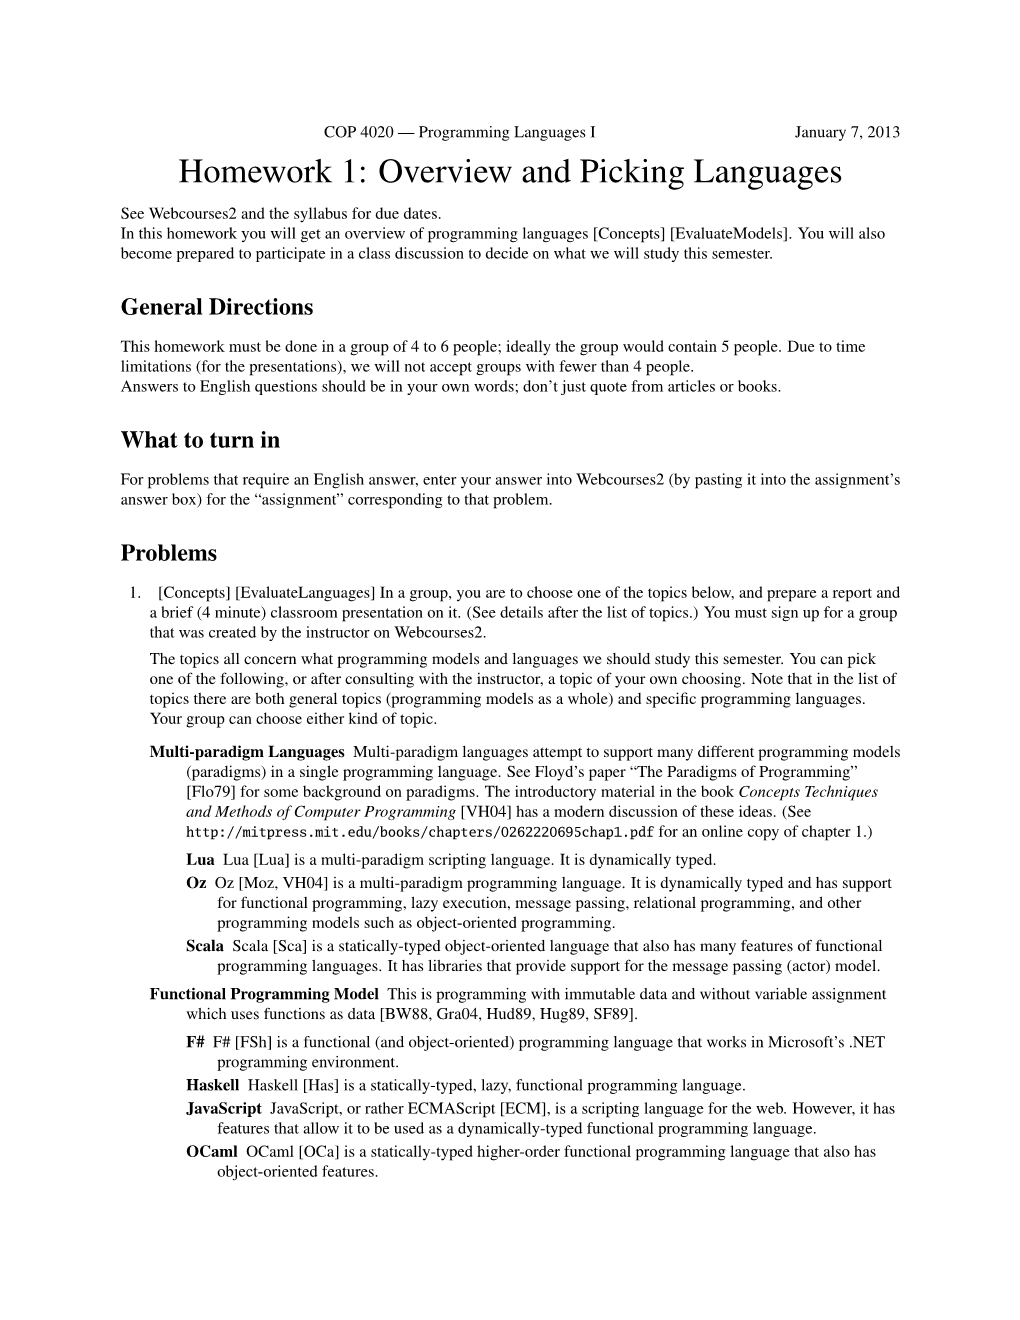 Homework 1: Overview and Picking Languages See Webcourses2 and the Syllabus for Due Dates